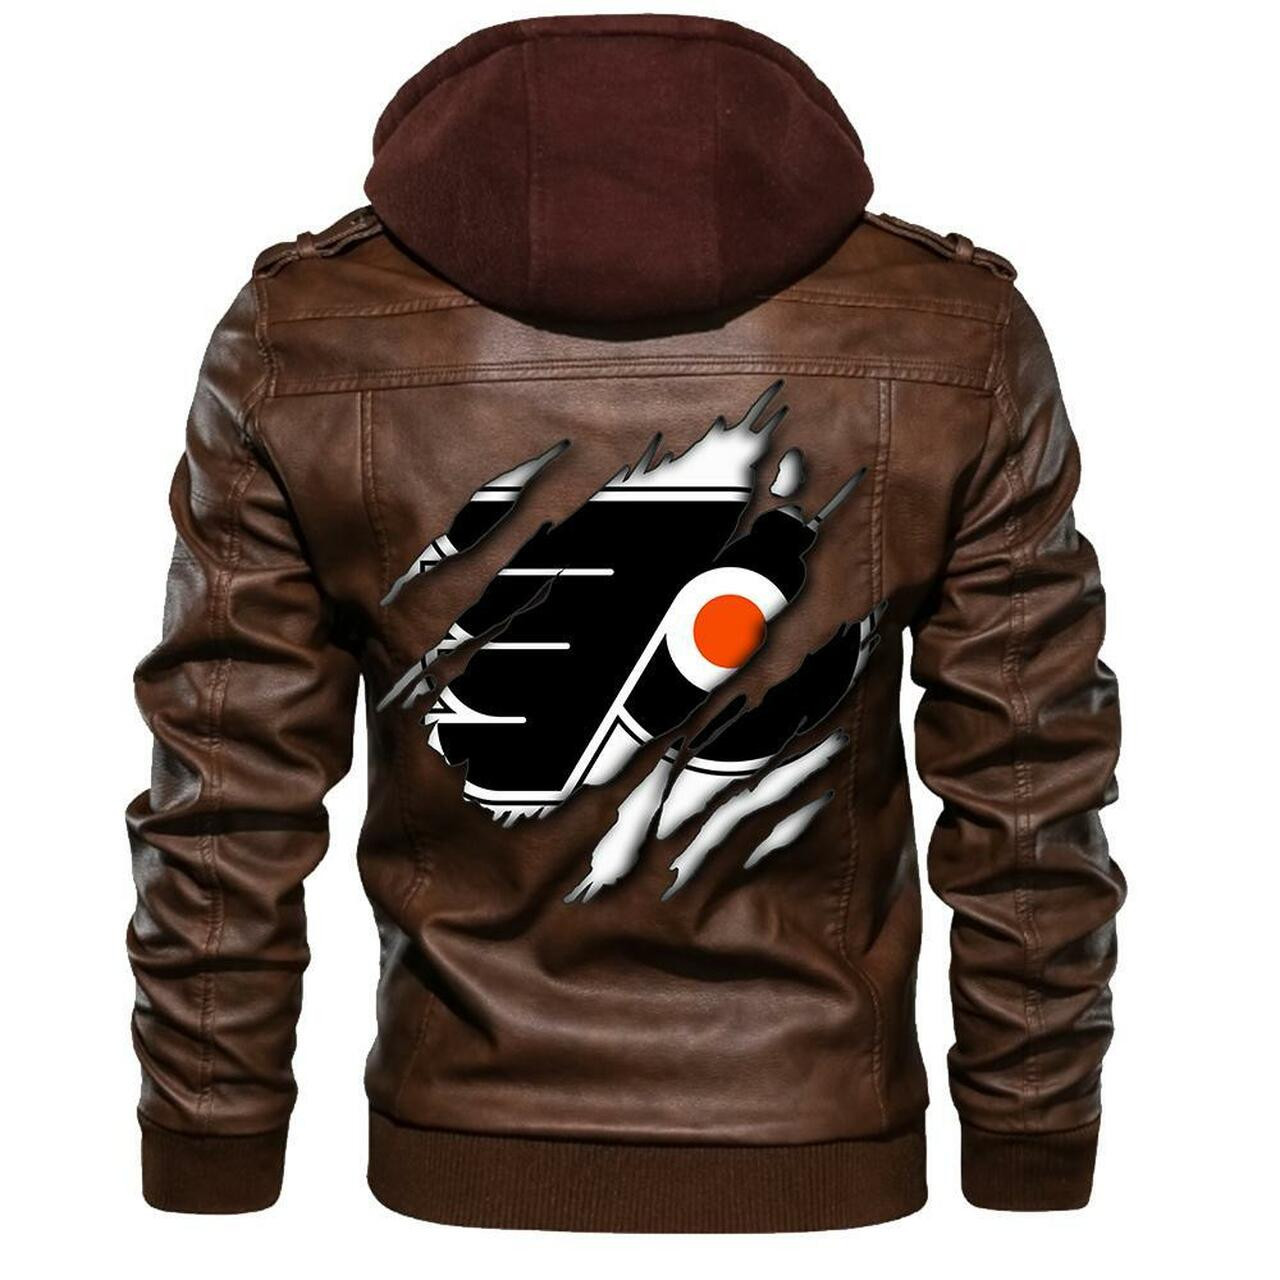 Check These Out If You Want Some Cool Hockey Jersey Today Word2